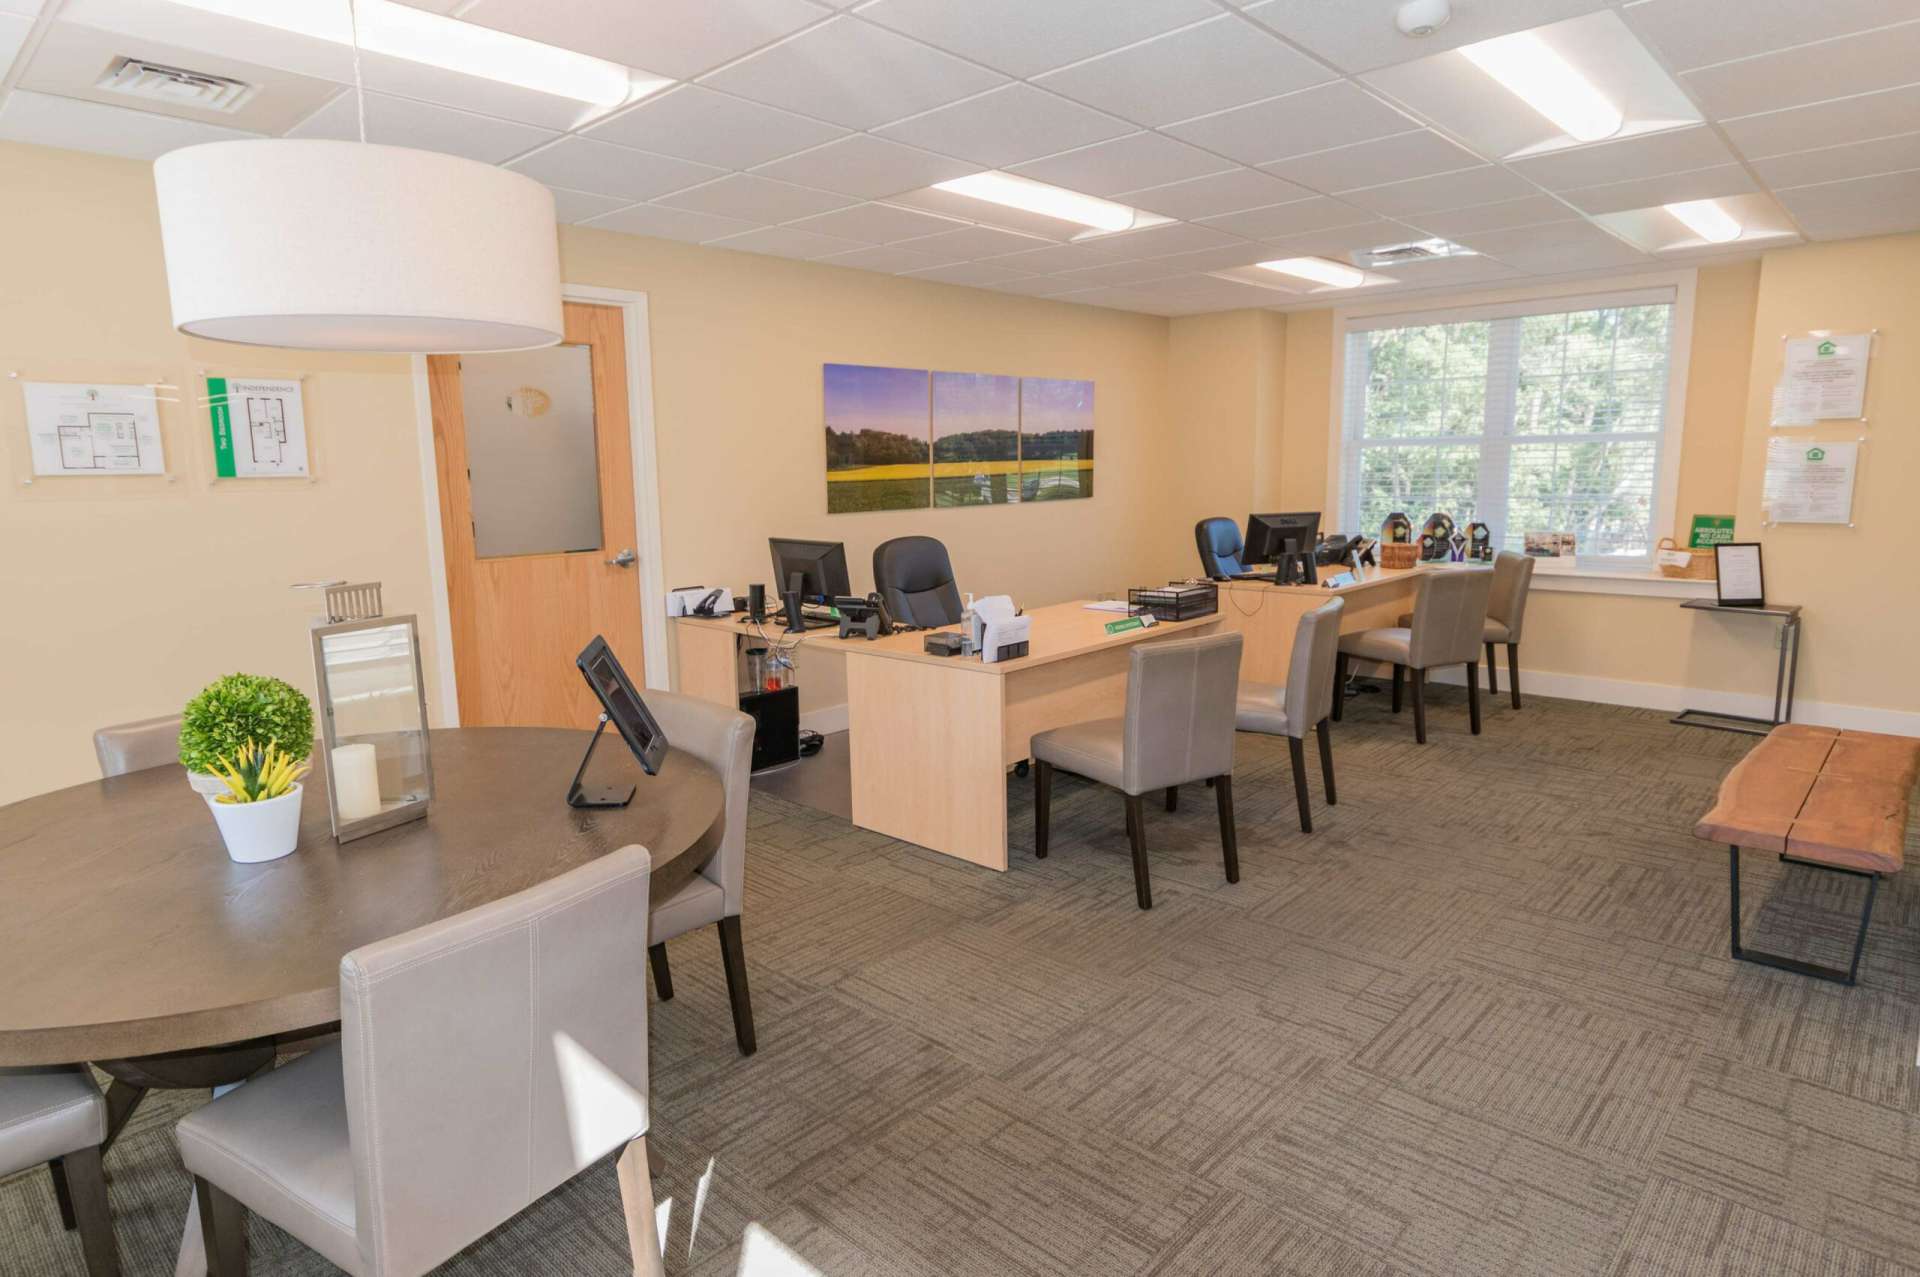 Leasing office with two office desks and a circular table.